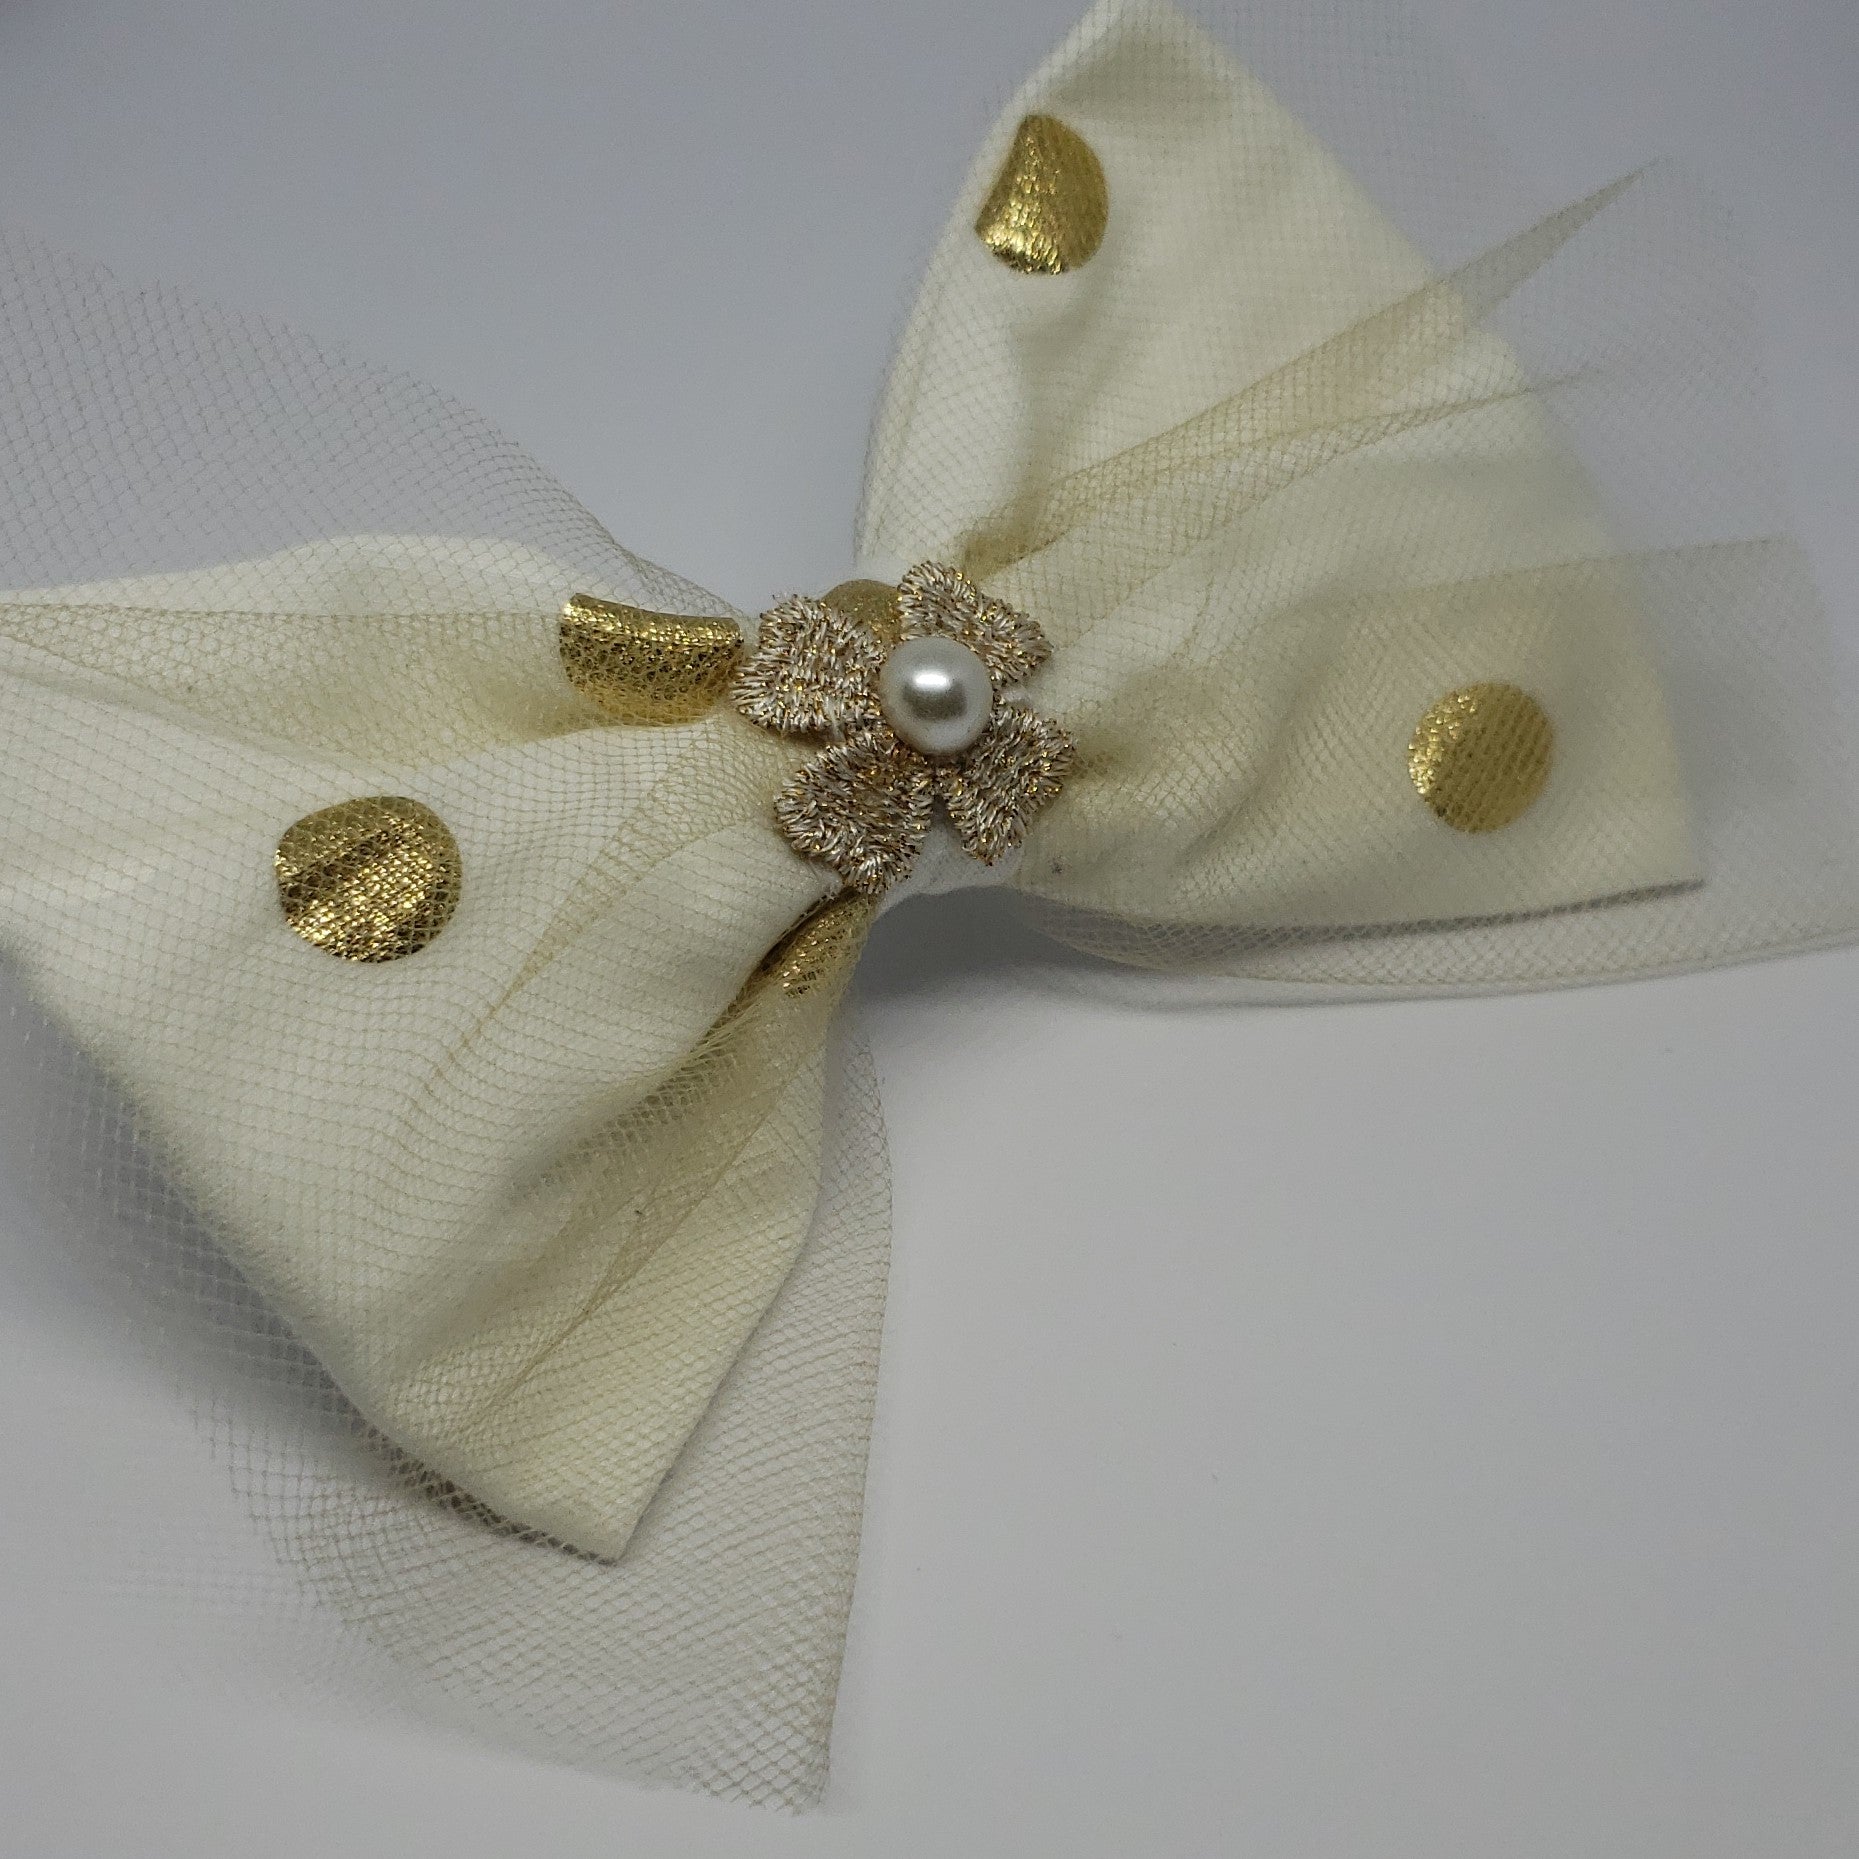 Kaelyn Freshwater Pearl Hair Bow in Cream & Gold Dots - Houzz of DVA Boutique